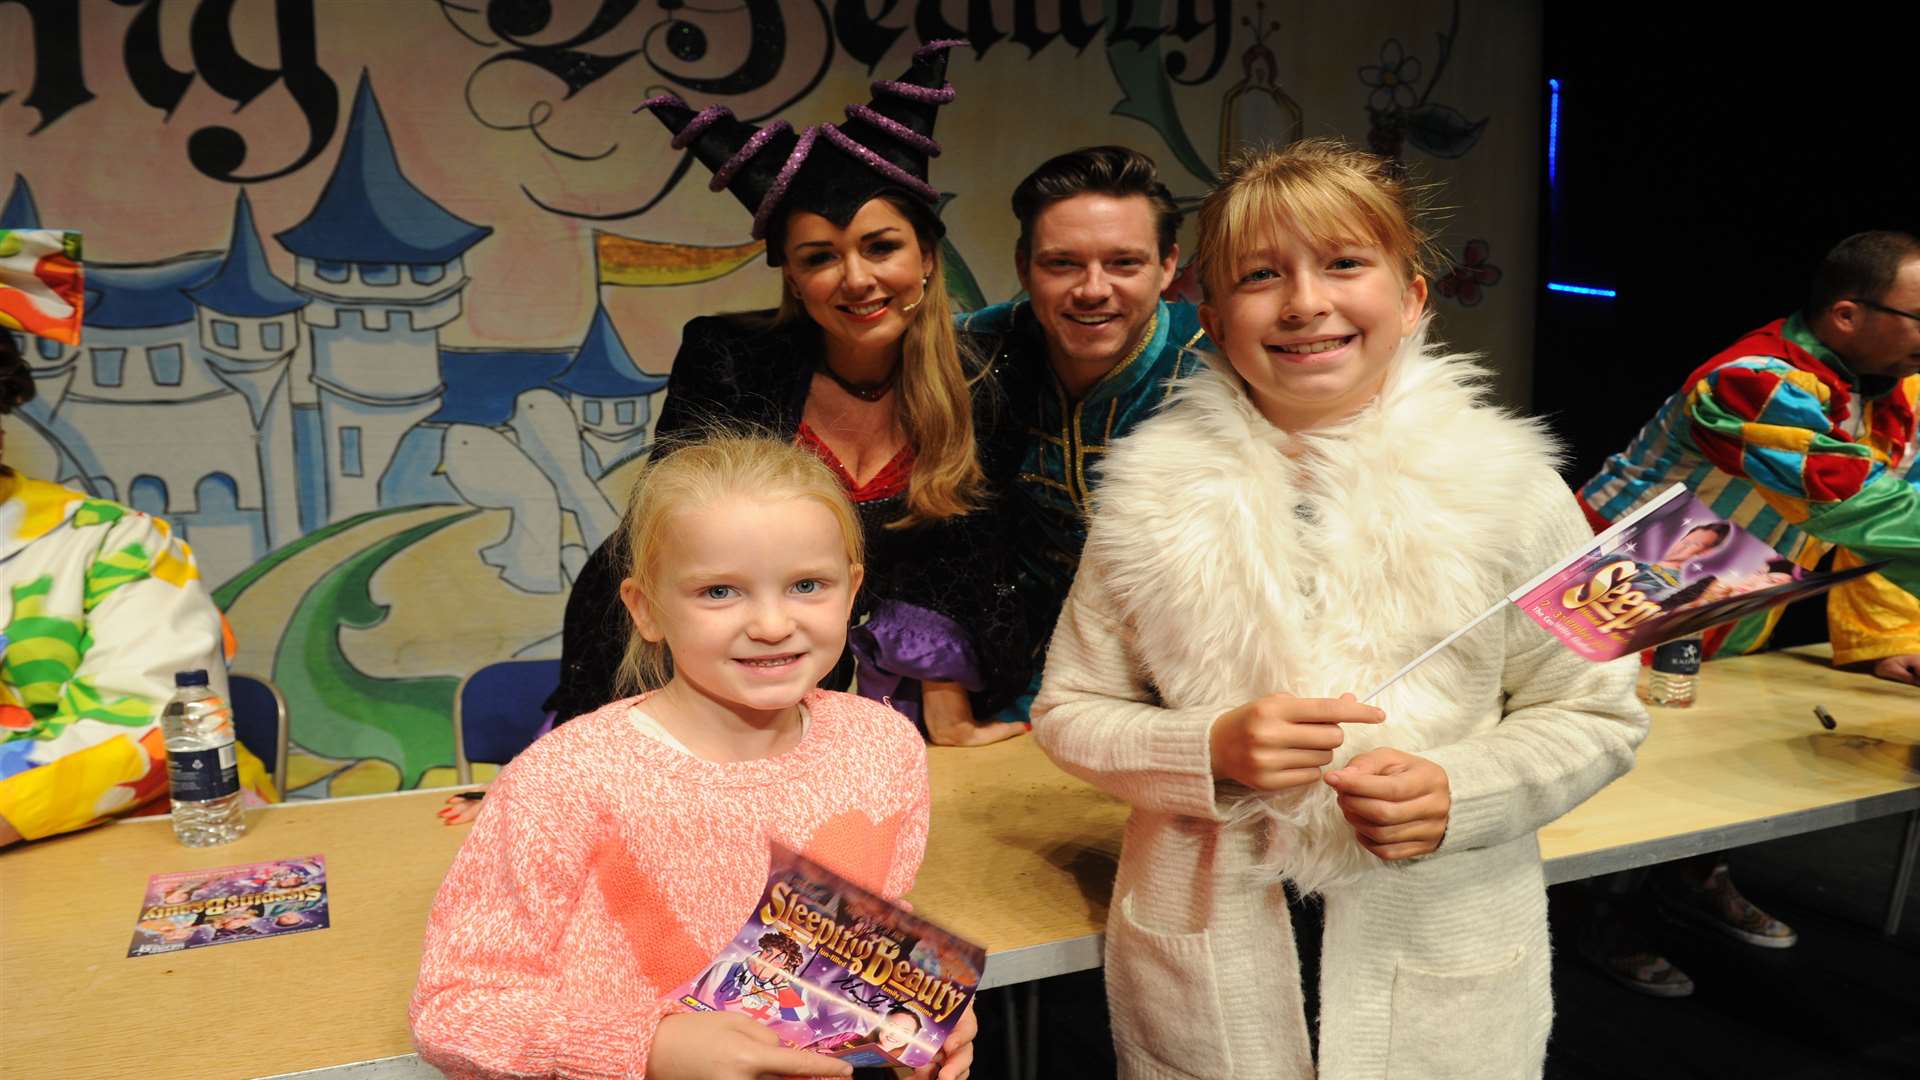 Claire Sweeney and Andy Moss meeting Lily and Sophia Kirk.